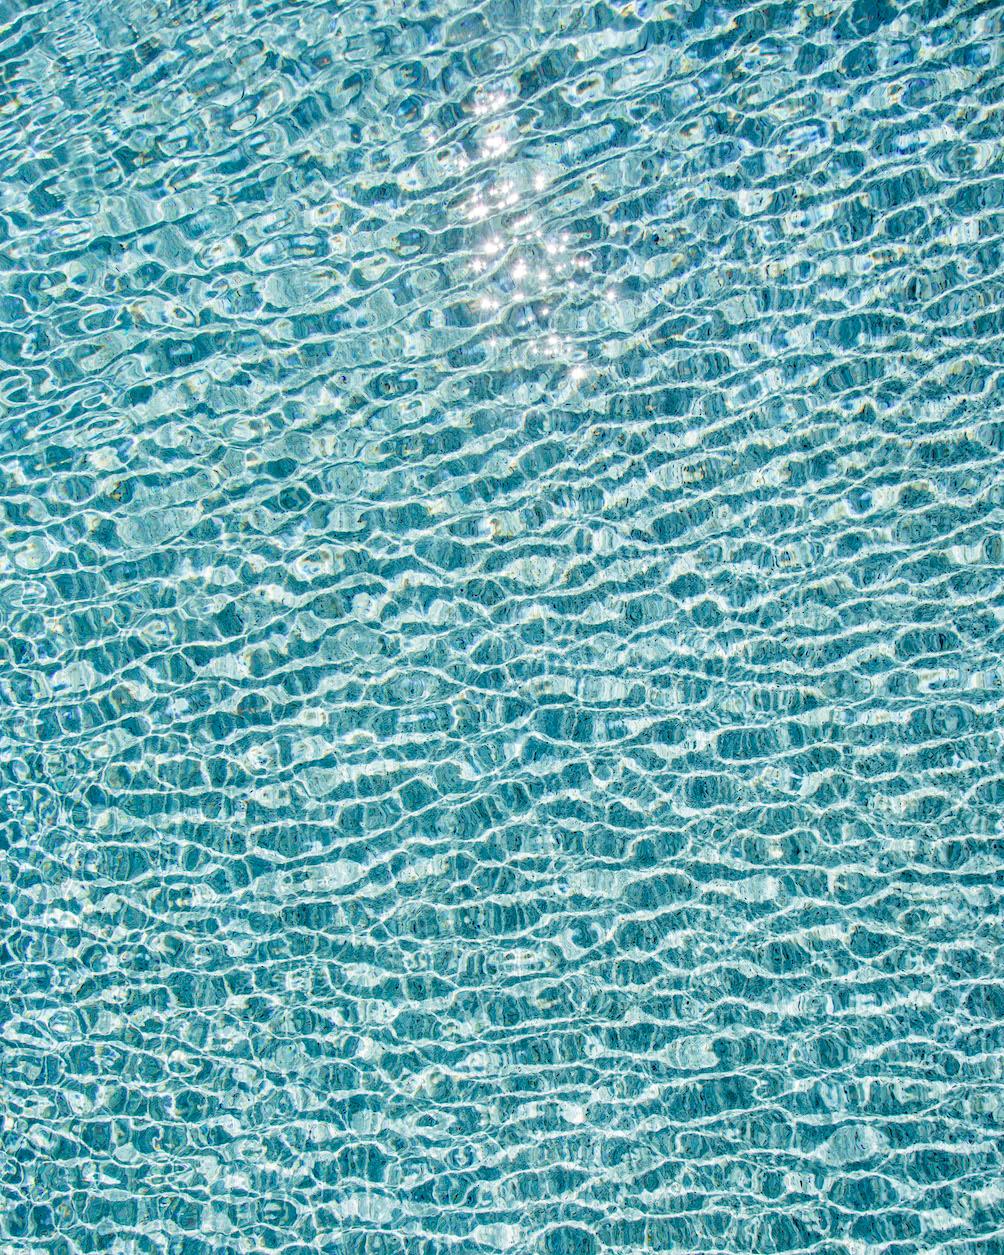 H2O V - extra large format photograph of sun reflections on pool water surface